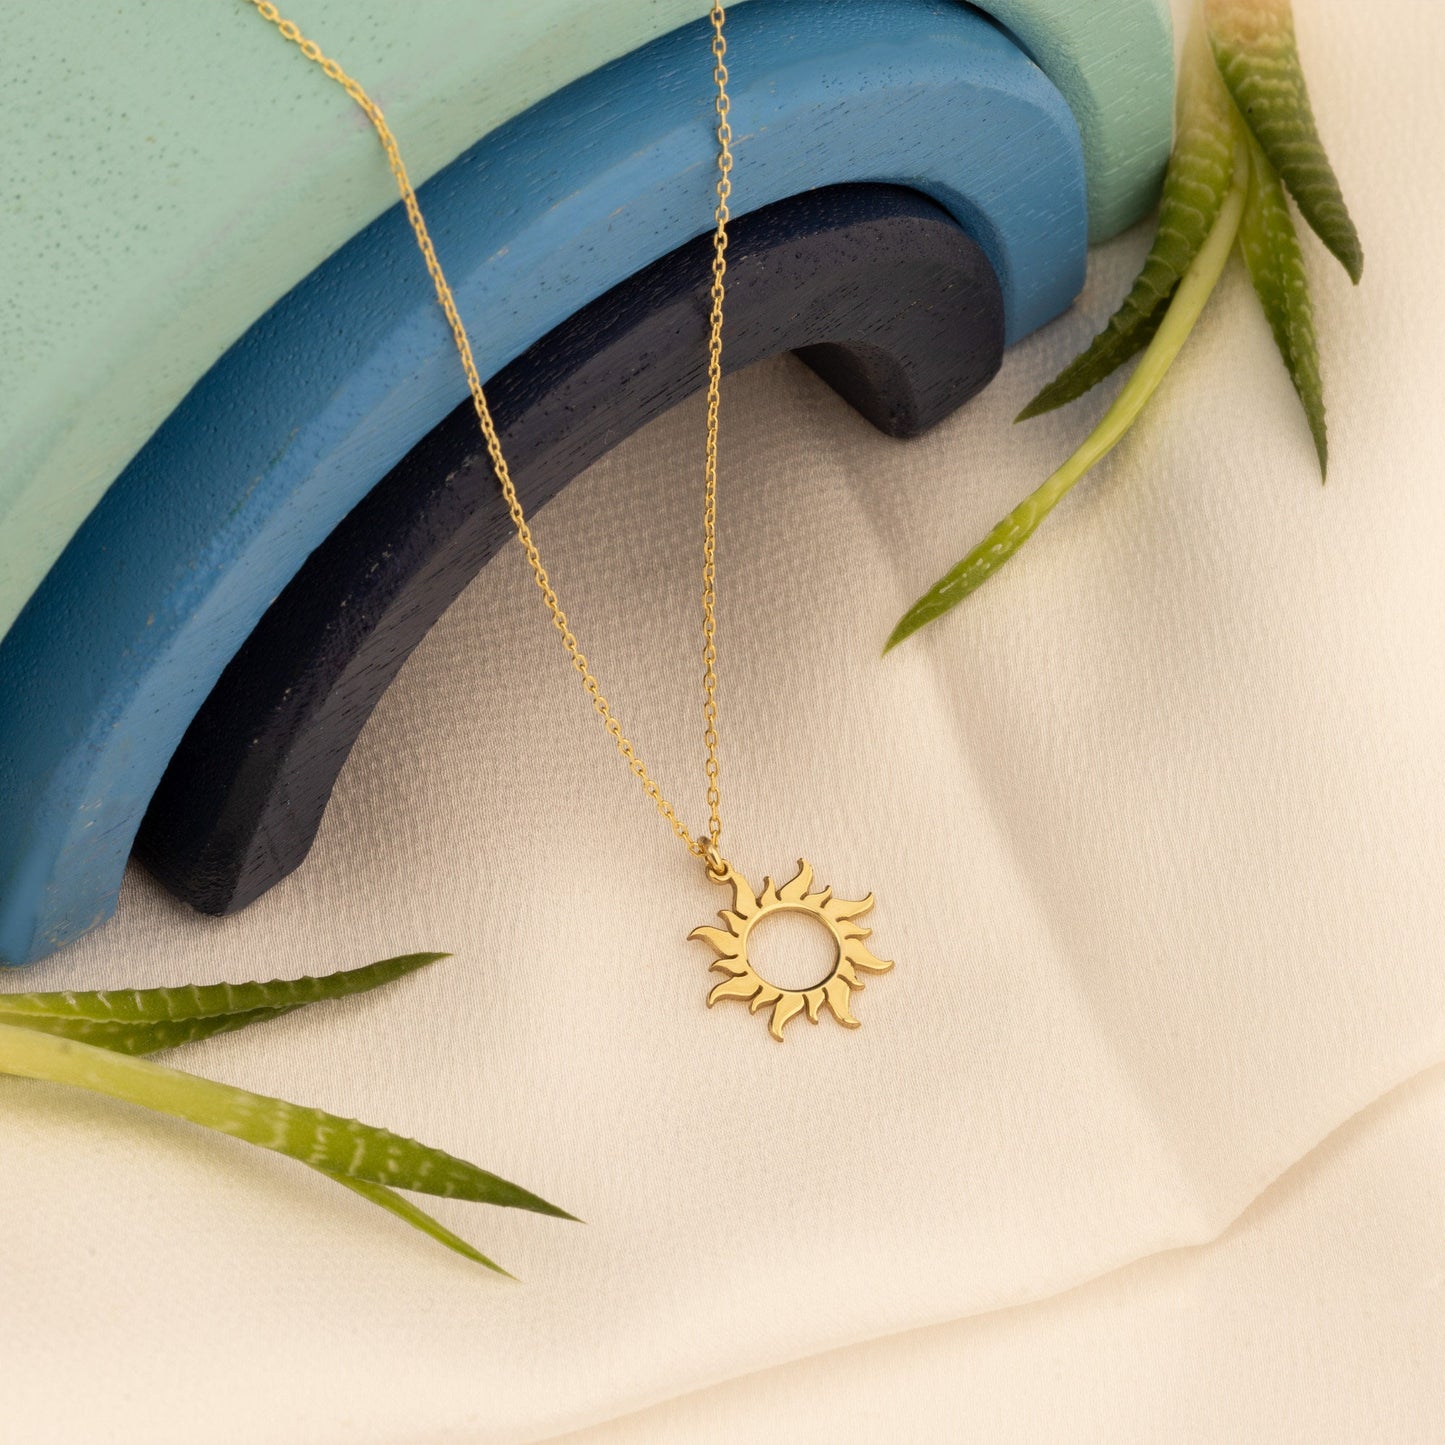 Sun Necklace - Gold Sunshine Necklaces - Sun Symbol Necklace - Necklace for Women - Celestial Necklace - Celestial Jewelry - Gift for Her